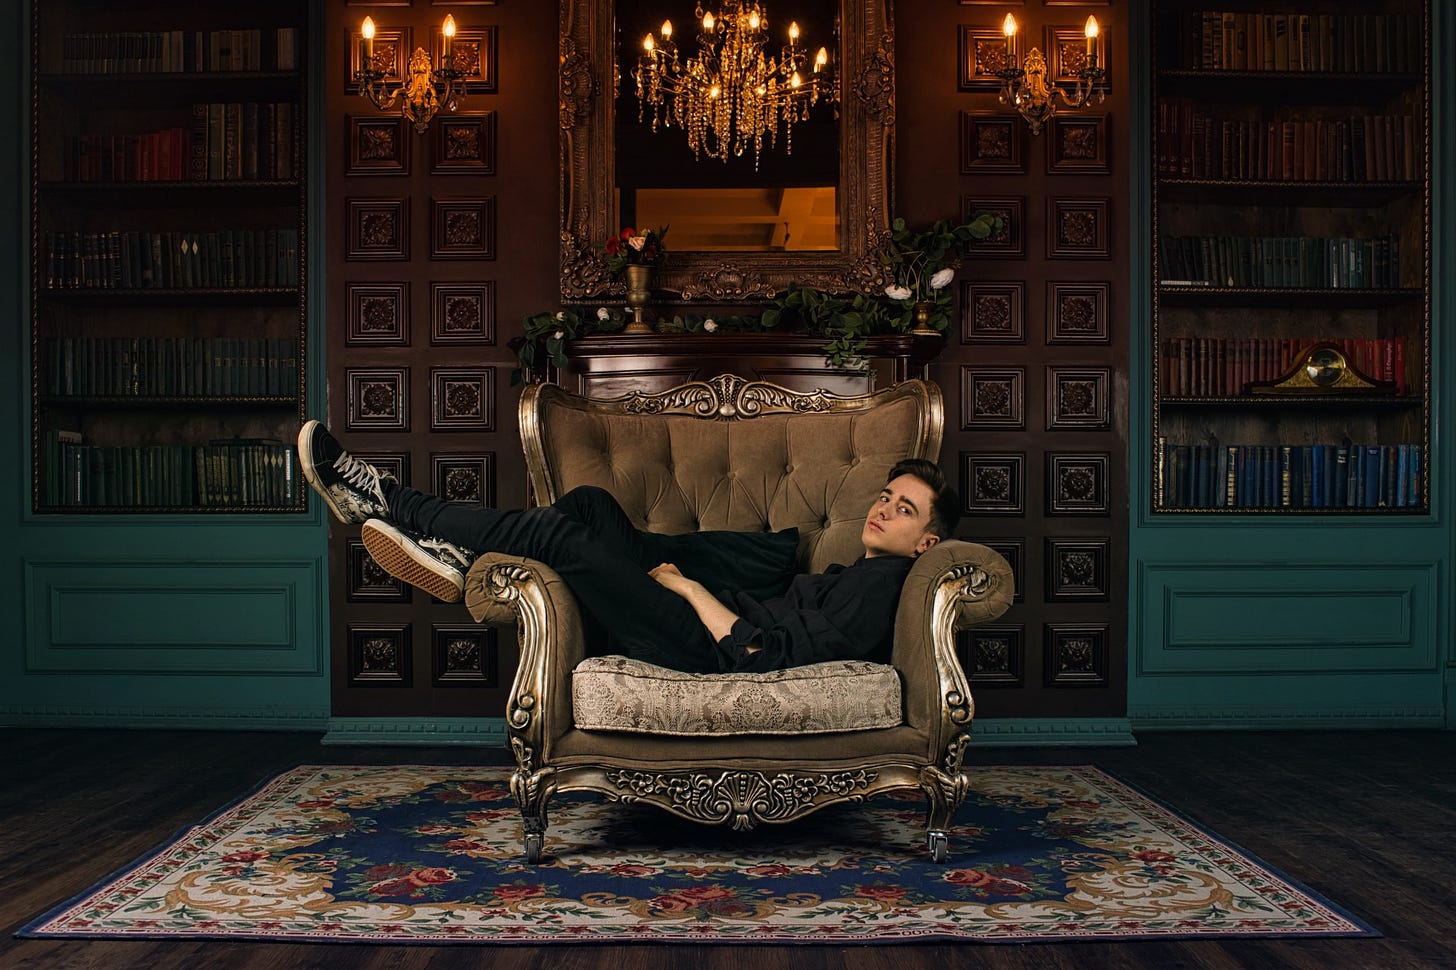 Man lying down in a palatial antiquely-designed room